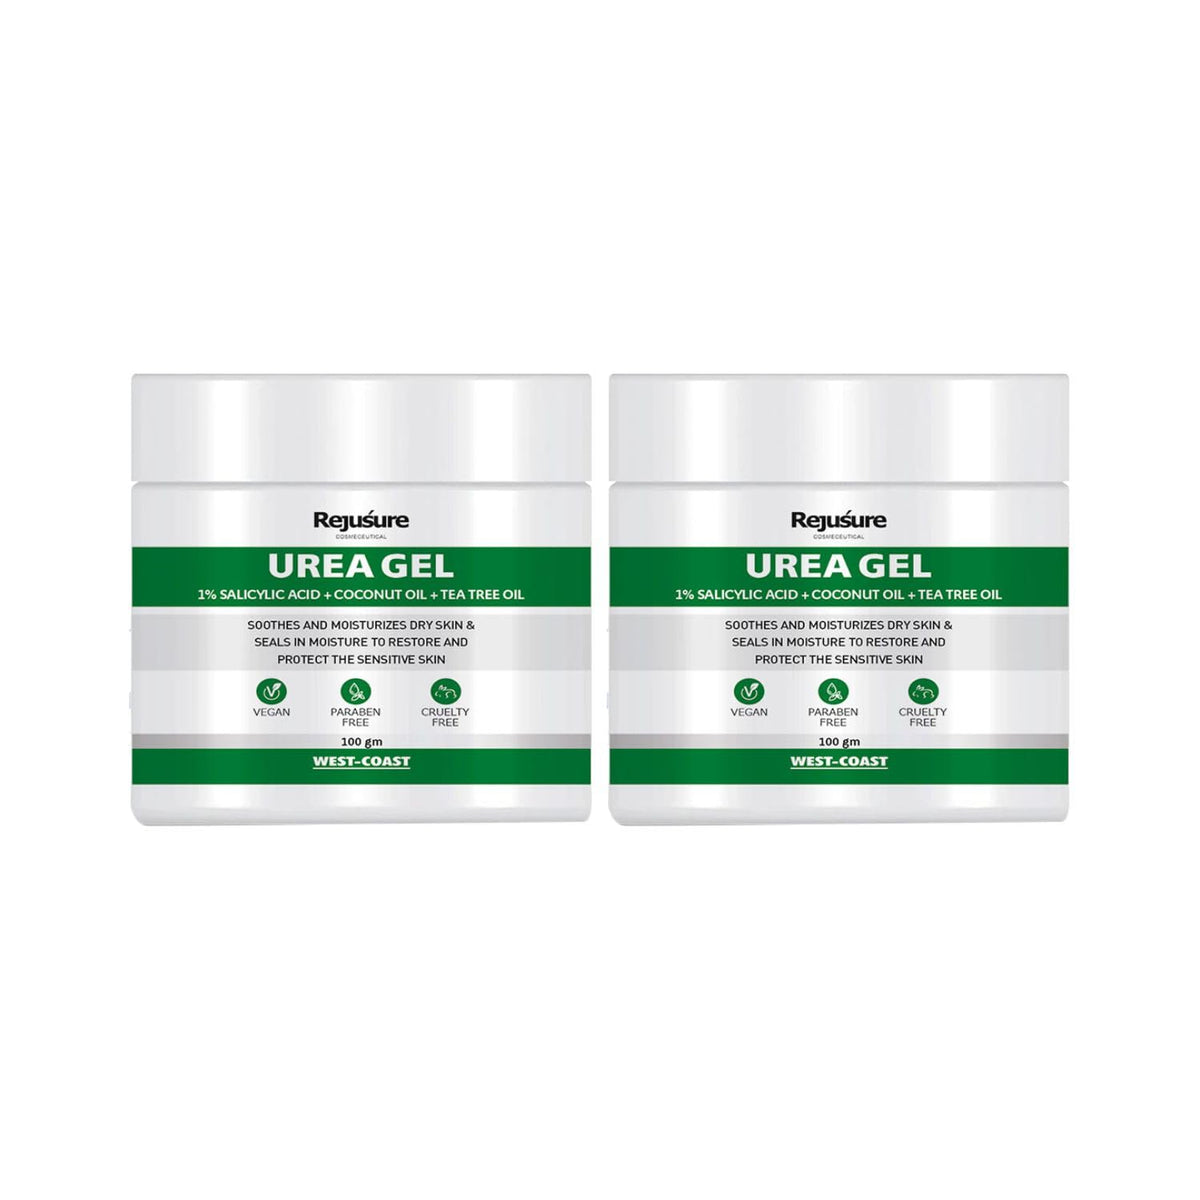 Rejusure Urea Gel With 1% Salicylic Acid + Coconut Oil + Tea Tree Oil Fast Absorbing For Dry/Itchy/Sensitive Skin, Softens & Moisturizes Skin For Face, Body & Foot – 100gm (Pack of 2)